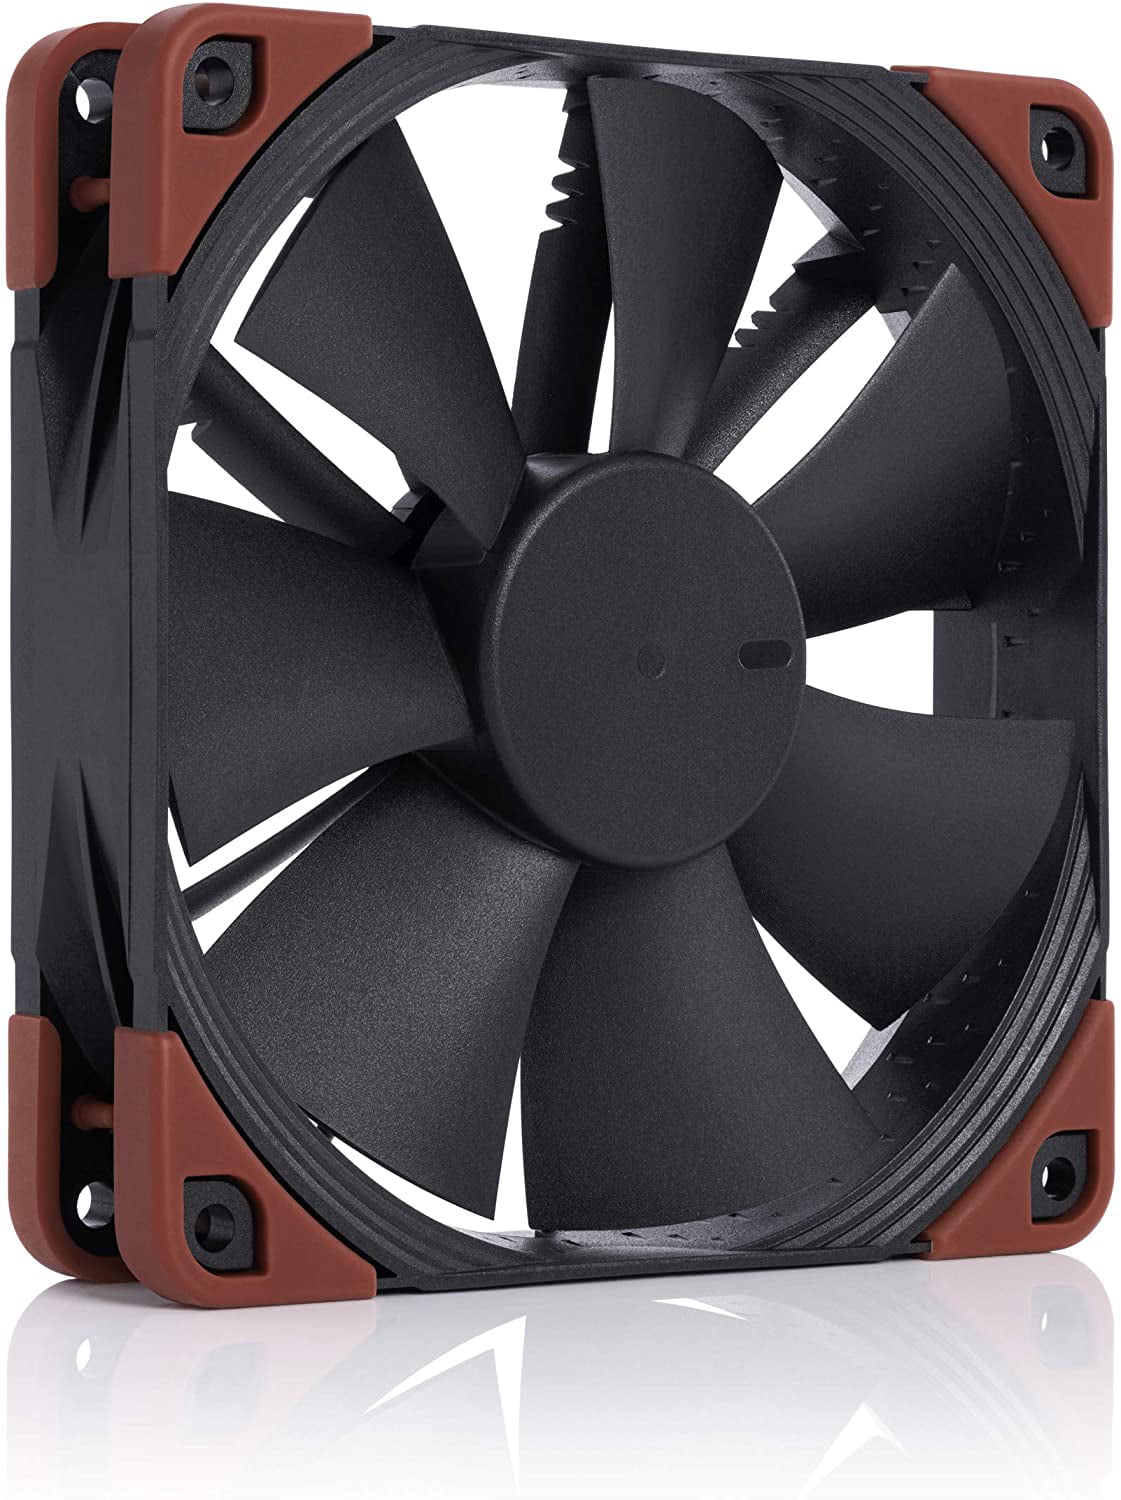 Noctua NF-F12 iPPC 3000 PWM Cooling Case Fan w/Focused Flow and SSO2 Bearing, 120 mm x 120 mm x 25 mm - PWM By Visit the Noctua Store Walmart.com